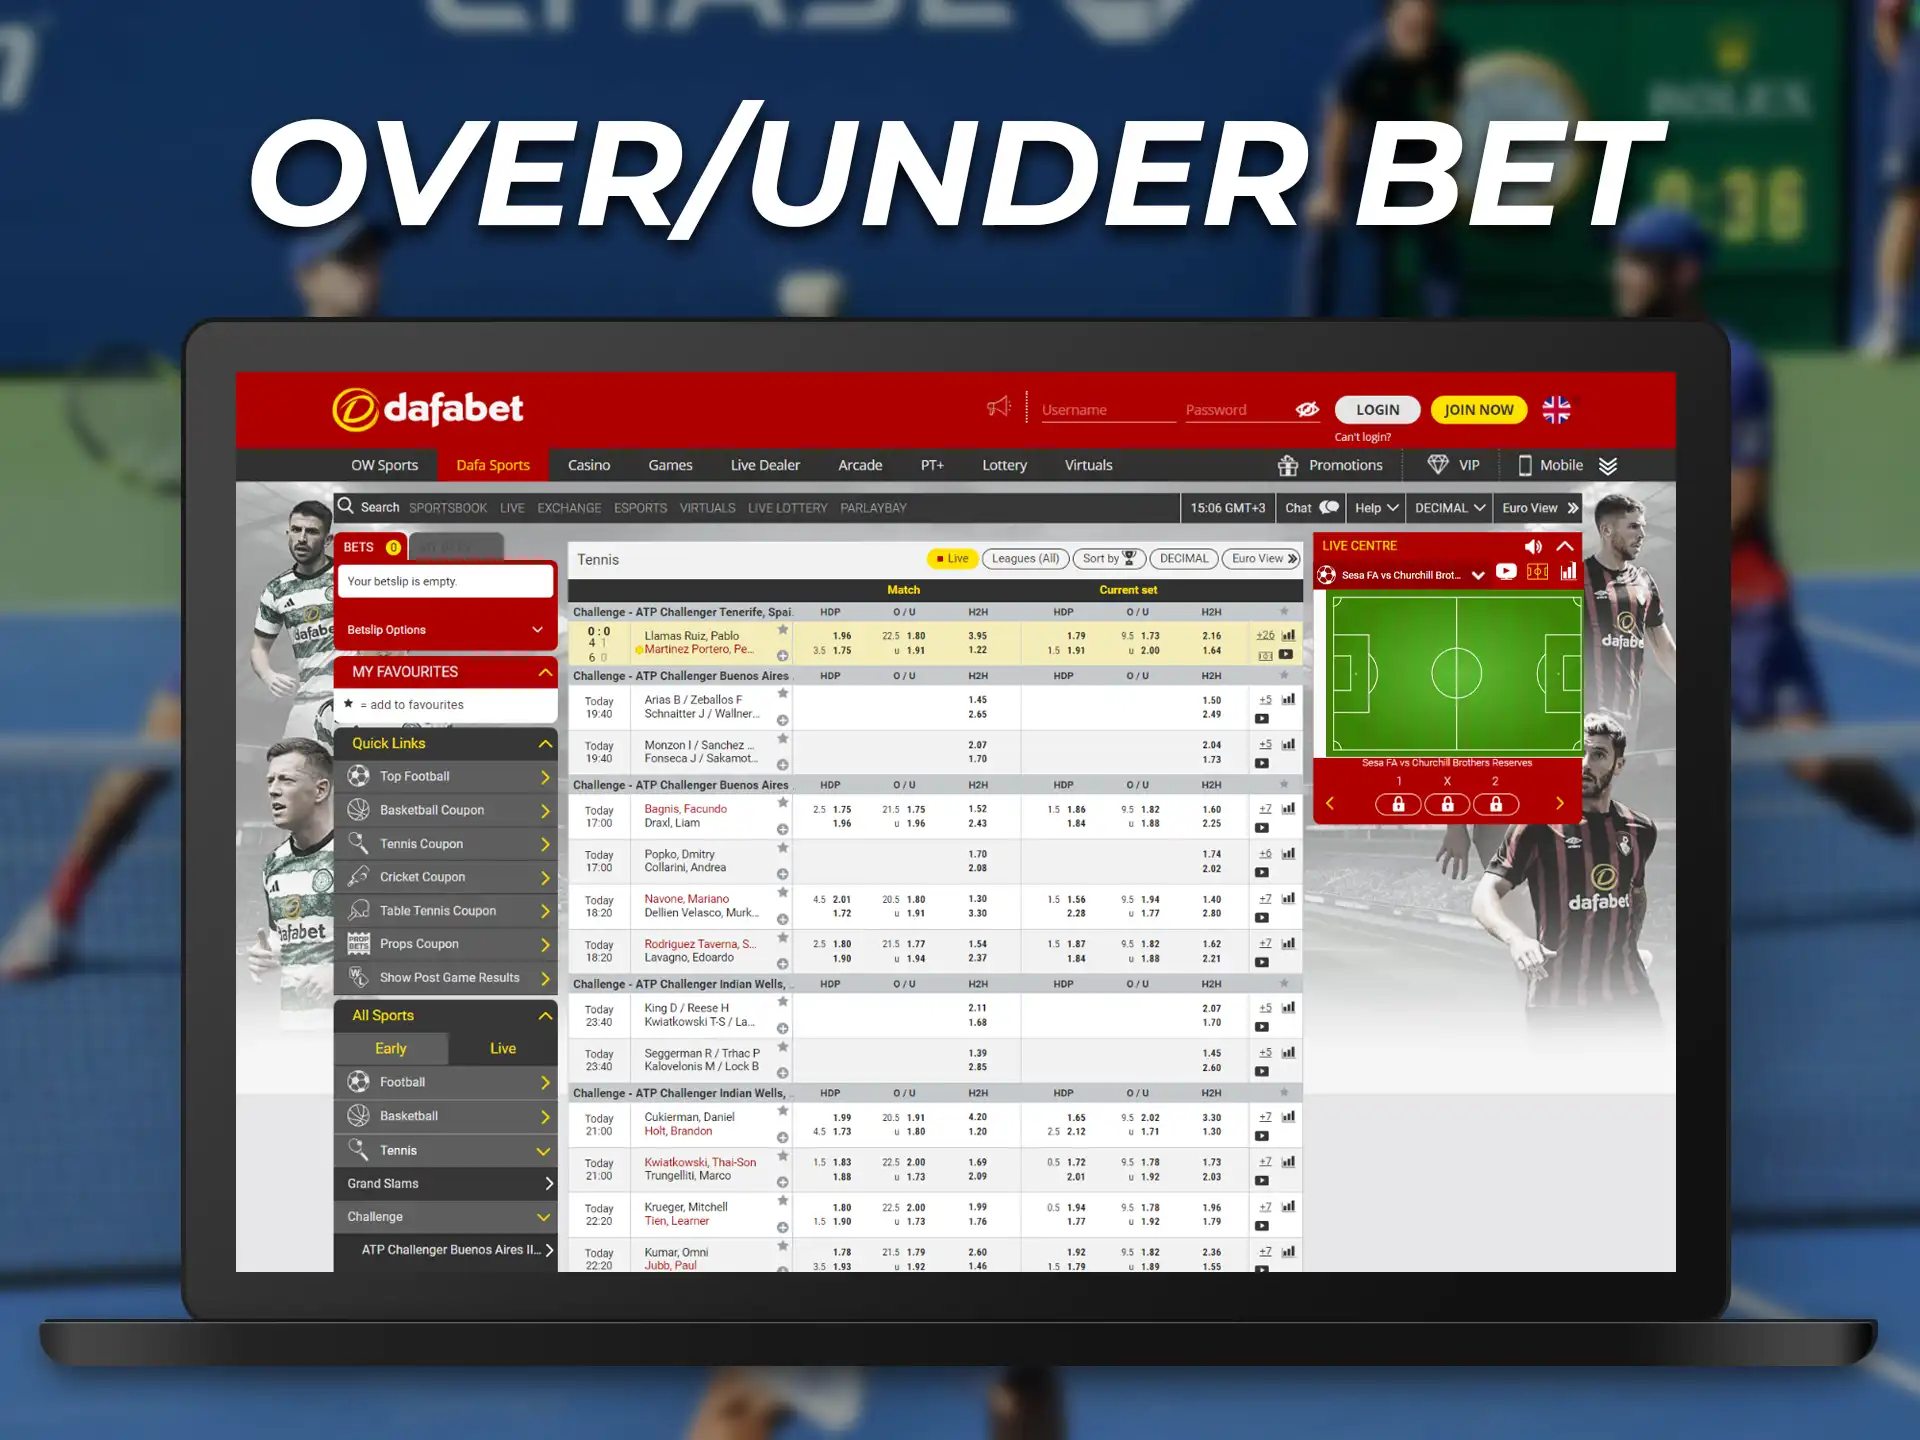 One of the popular tennis bets is the Over/Under bet.